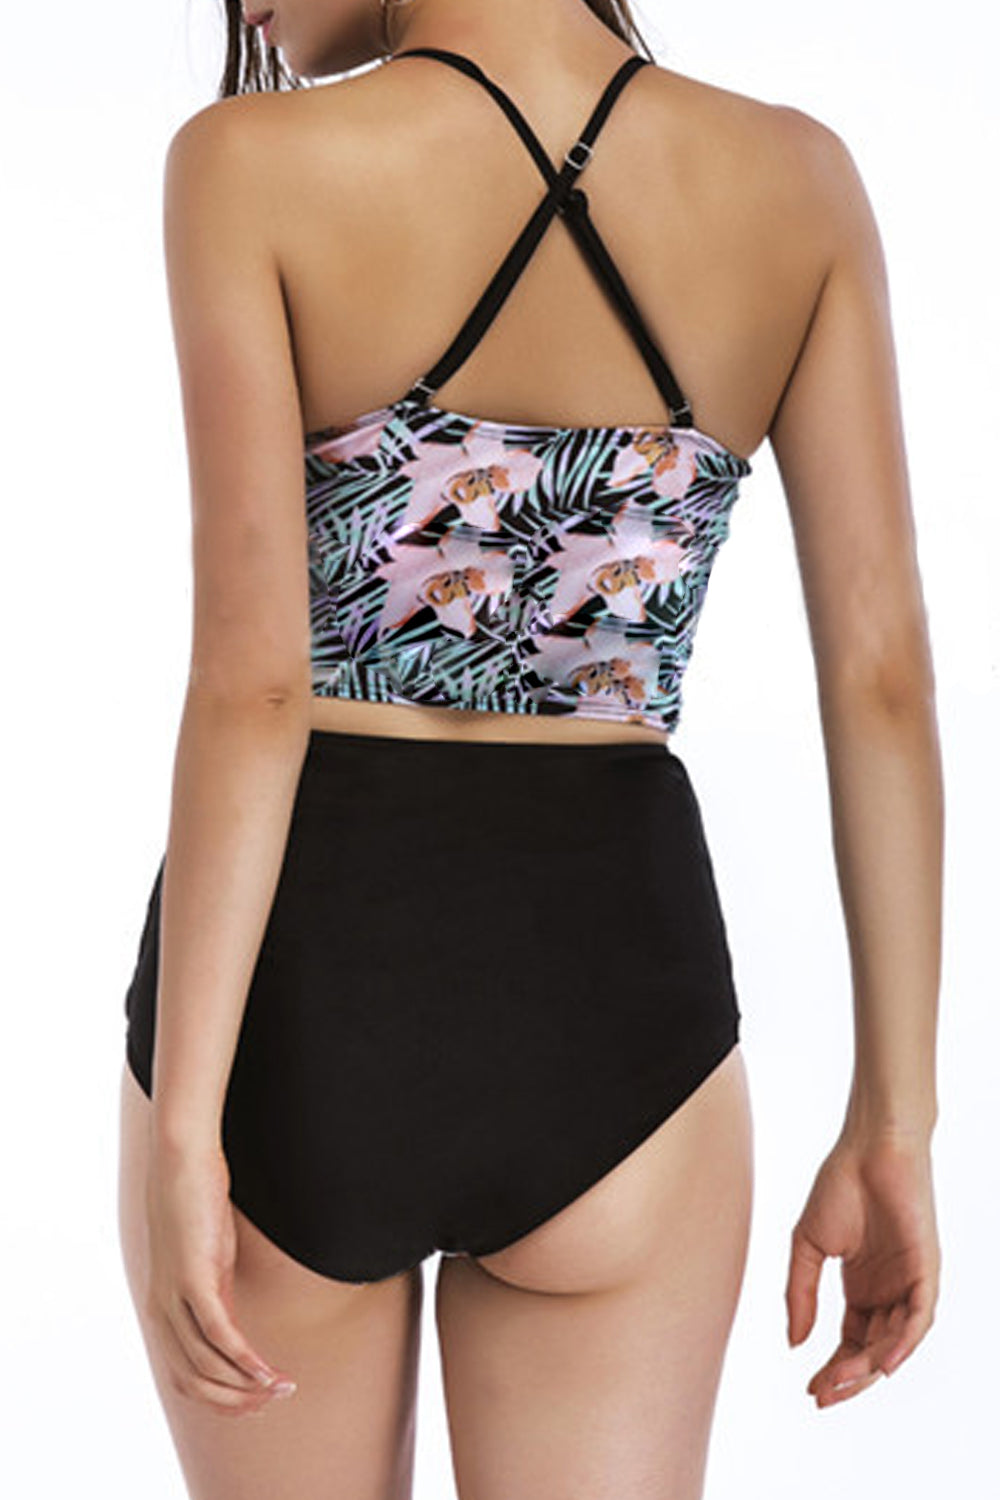 Iyasson Floral Printing High-waisted Fit Two-piece Swimwear